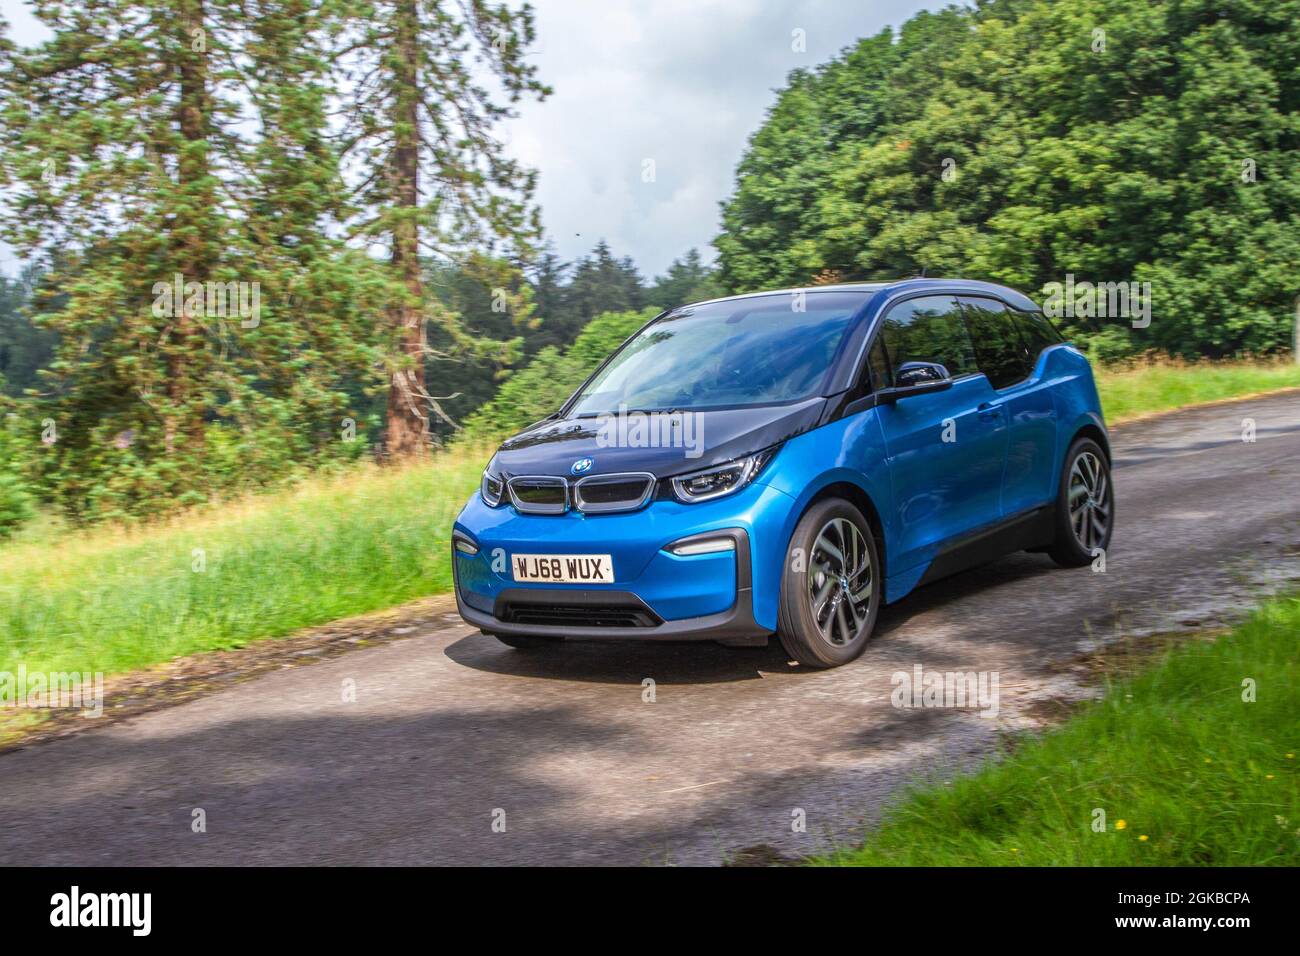 2018 blue BMW i3 1 speed automatic 600cc hybrid electric  en-route KLMC at ‘The Cars the Star Show” in Holker Hall & Gardens, Grange-over-Sands, UK Stock Photo